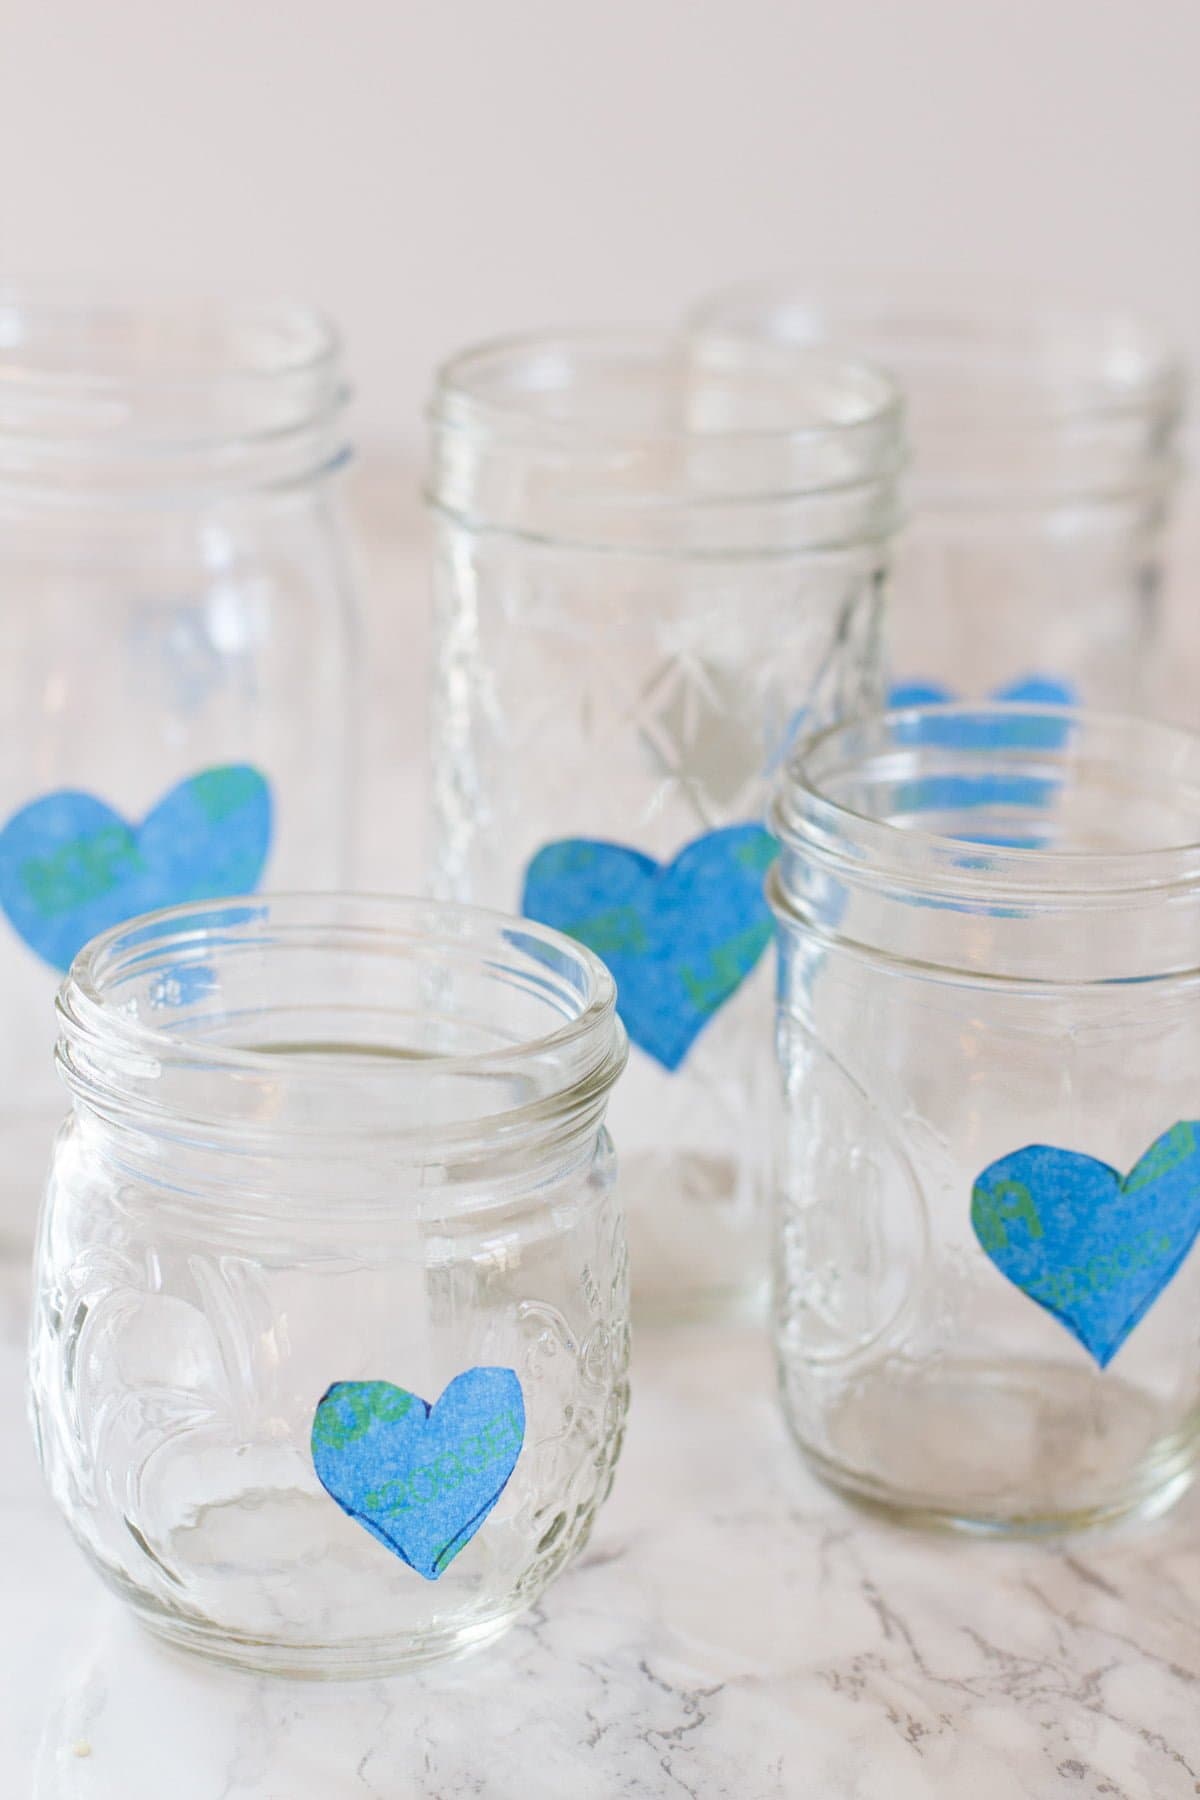 Cluster of mason jars, each with a heart made of painter's tape on the side